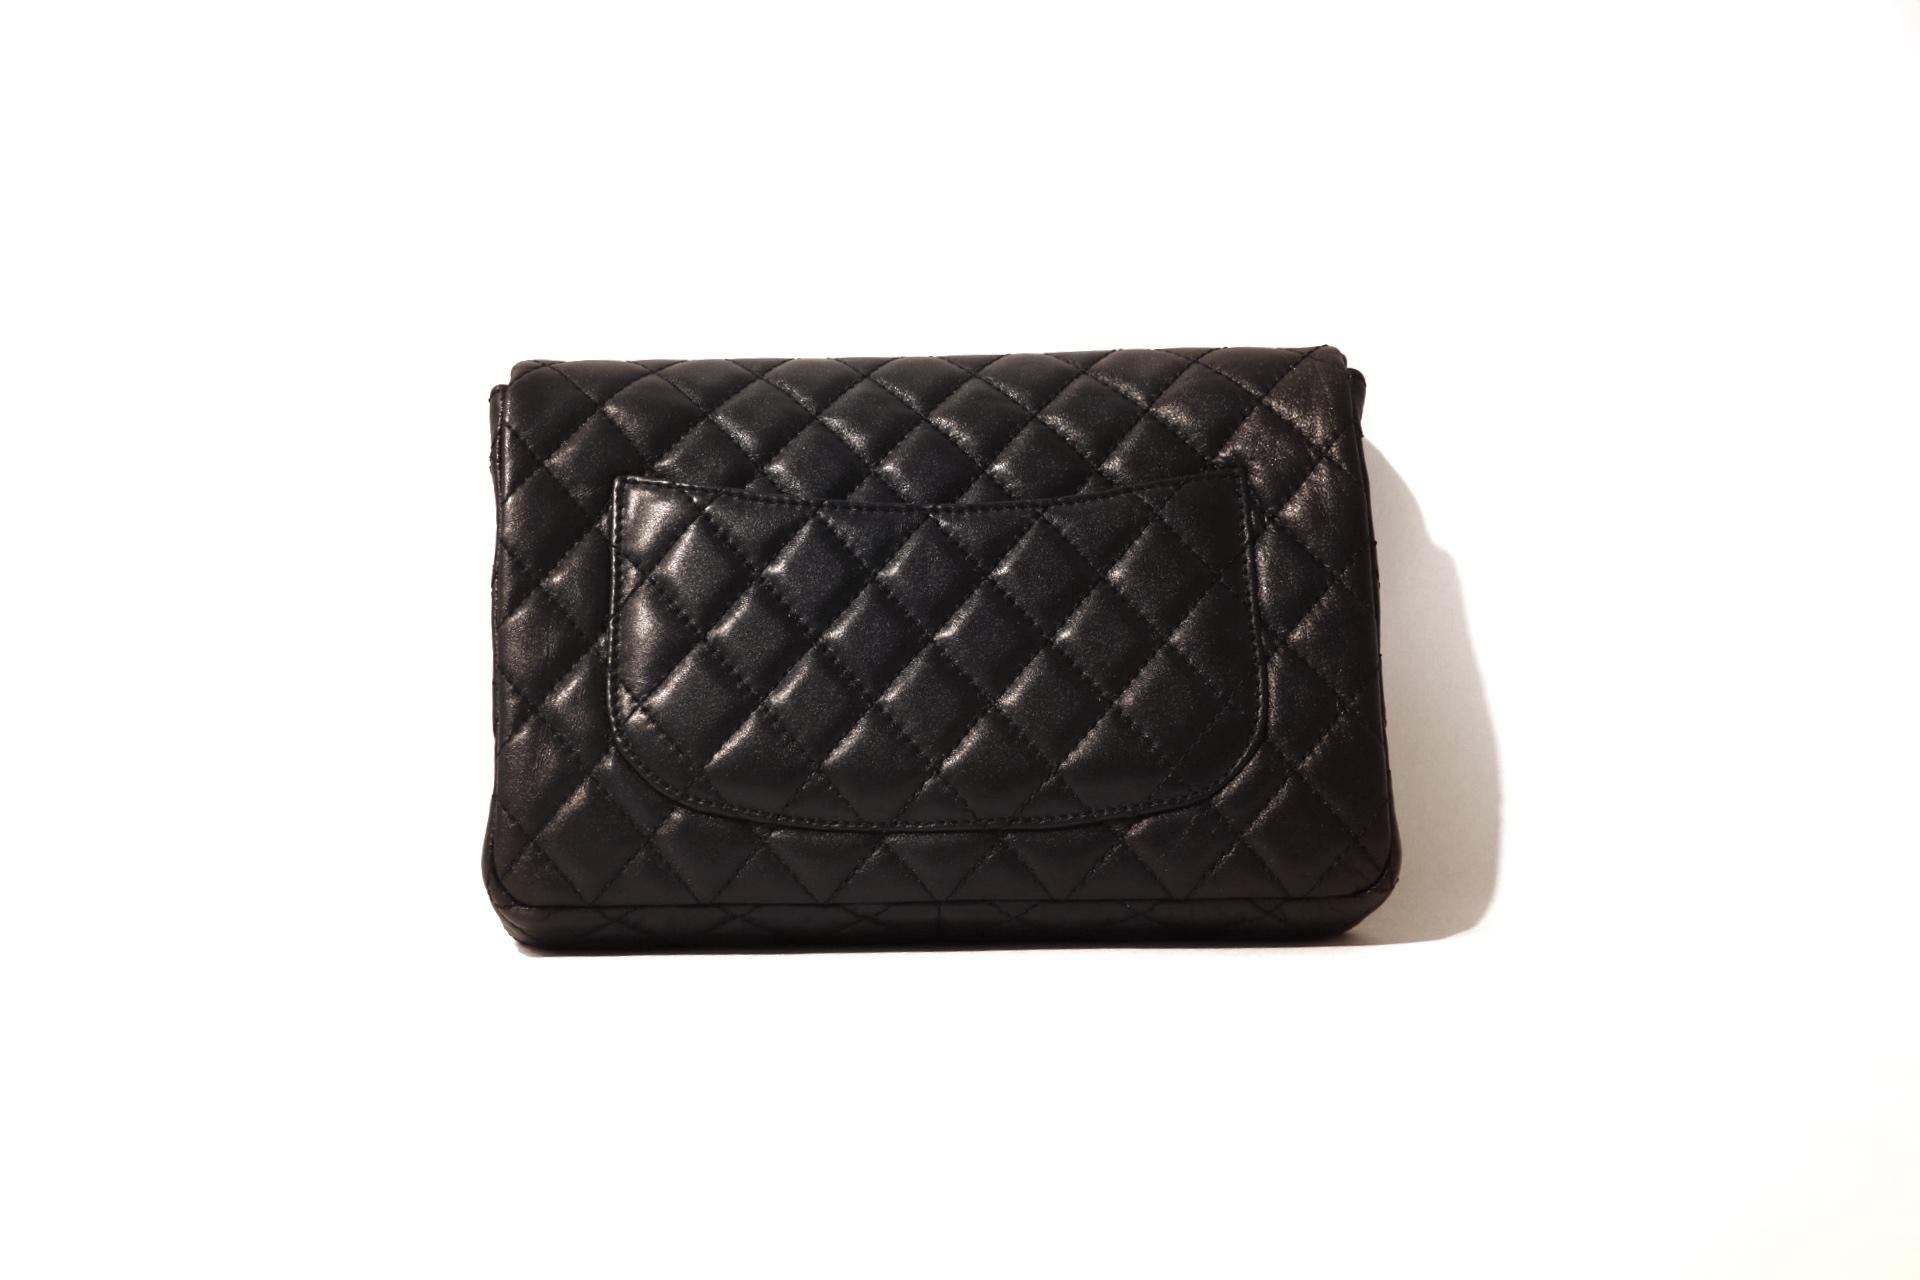 This authentic Chanel Classic Mademoiselle Flap Bag is in excellent condition.  
Black calfskin is quilted in signature Chanel diamond pattern.  Matte gold mademoiselle twist lock closure secures the front flap.  Single snake chioan strap may be